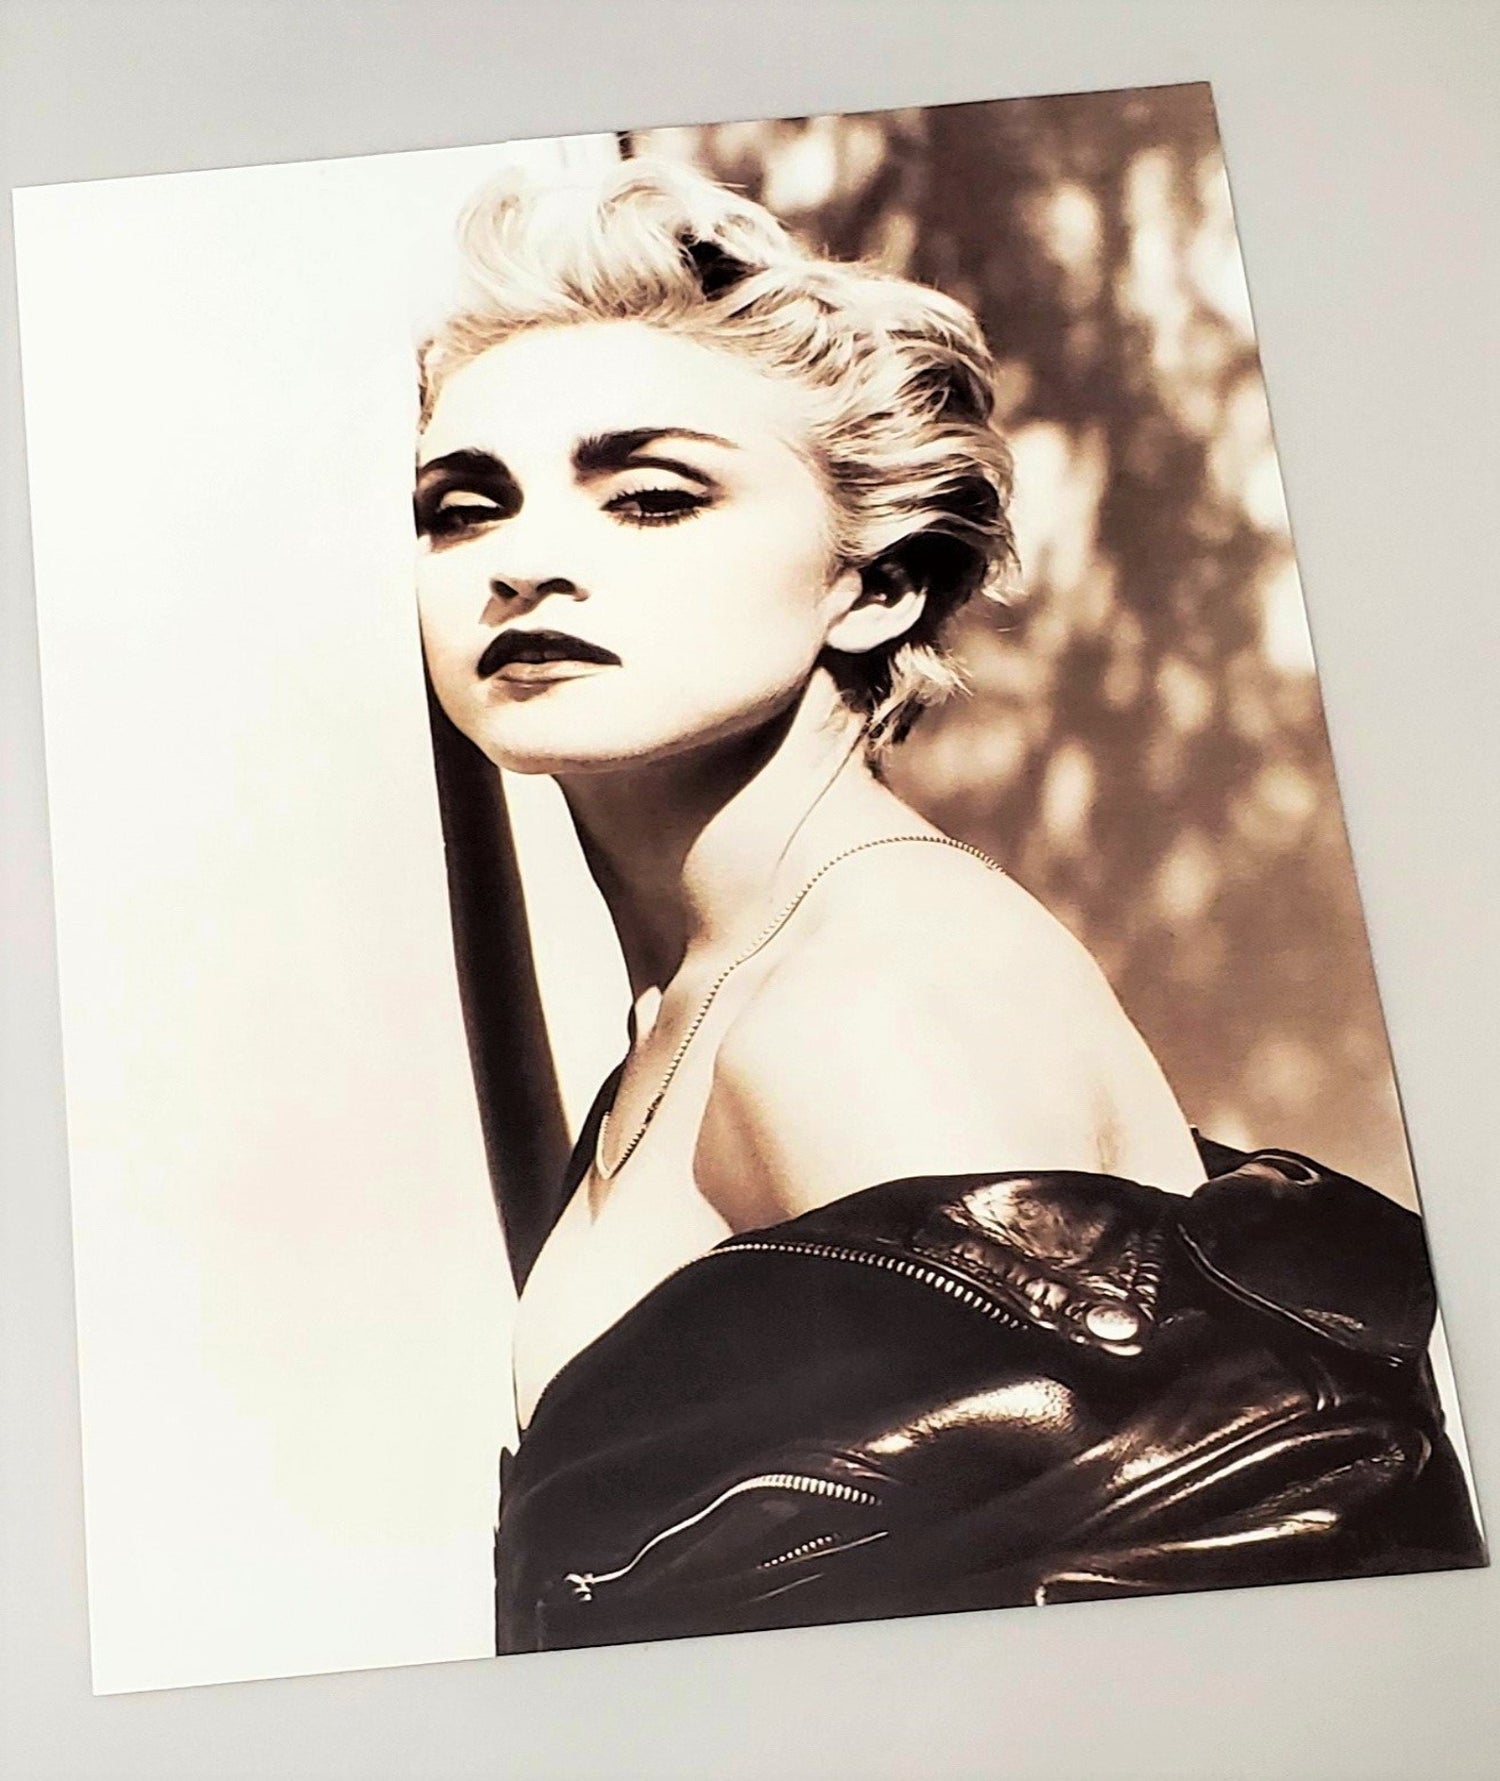 Original 1991 photo featured in Madonna Photo Album Japanese Edition softcover book